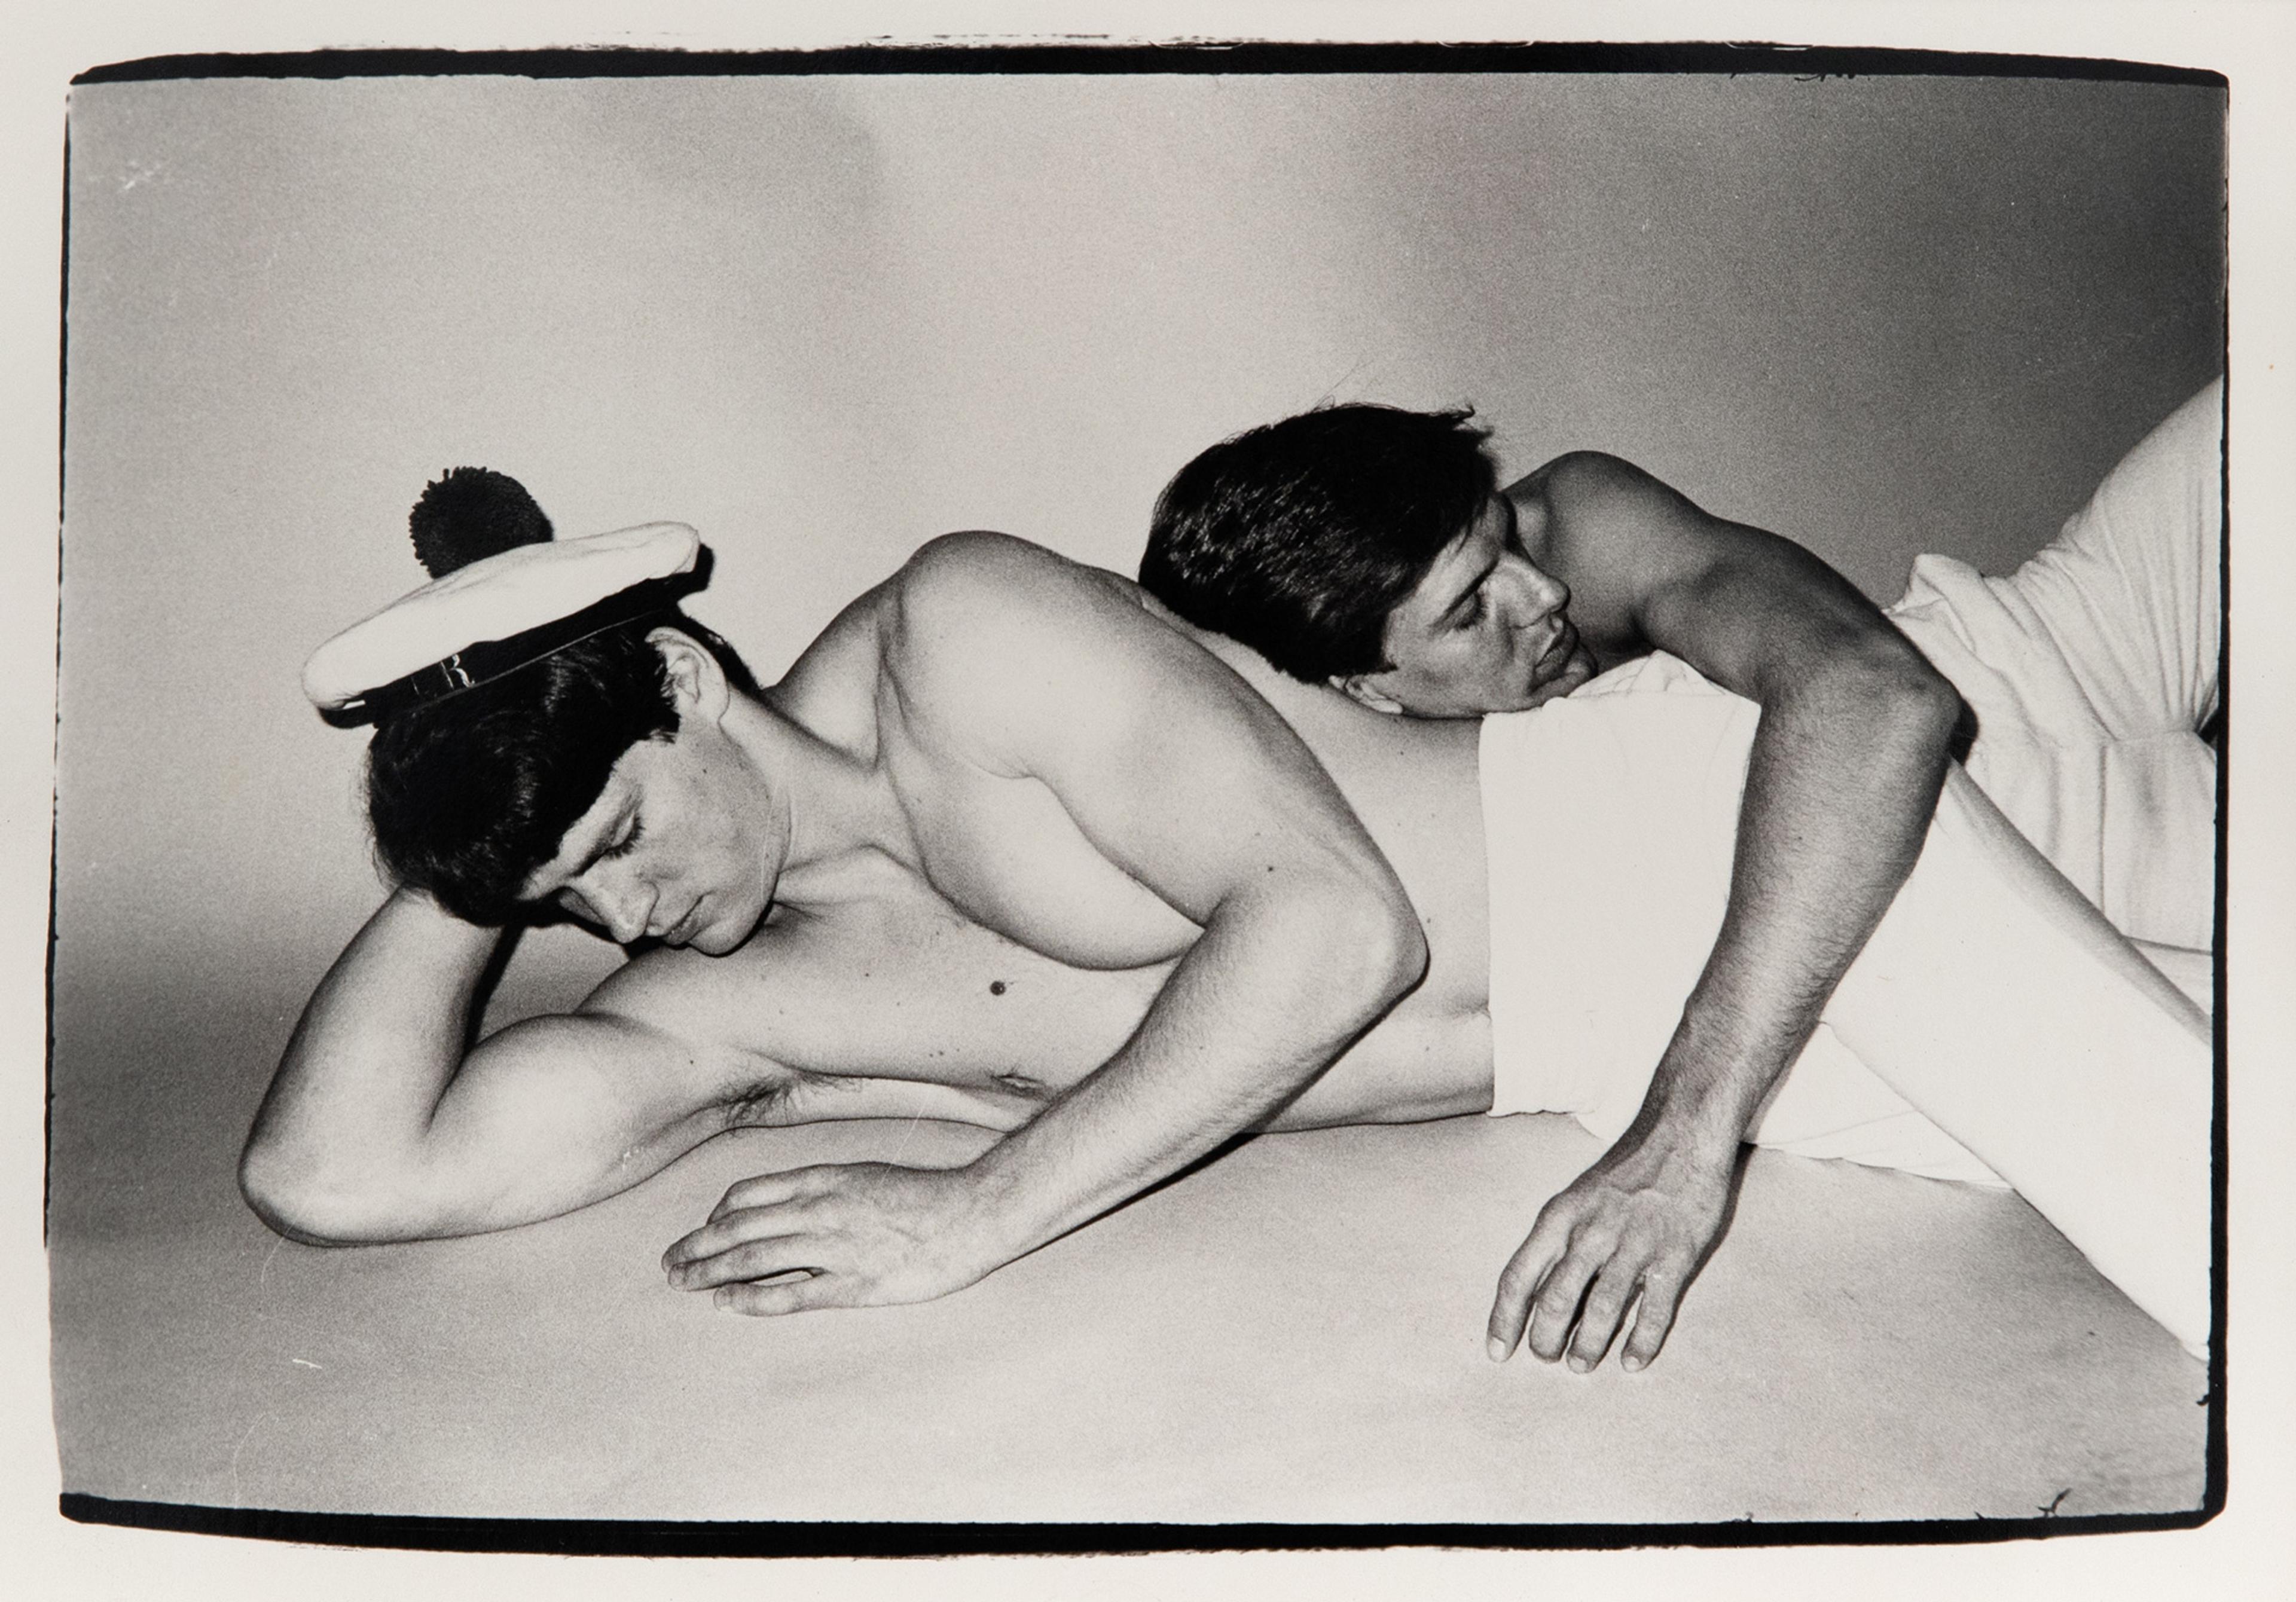 One topless man with a sailor hat lying on the floor, another topless man leaning on him with his head.